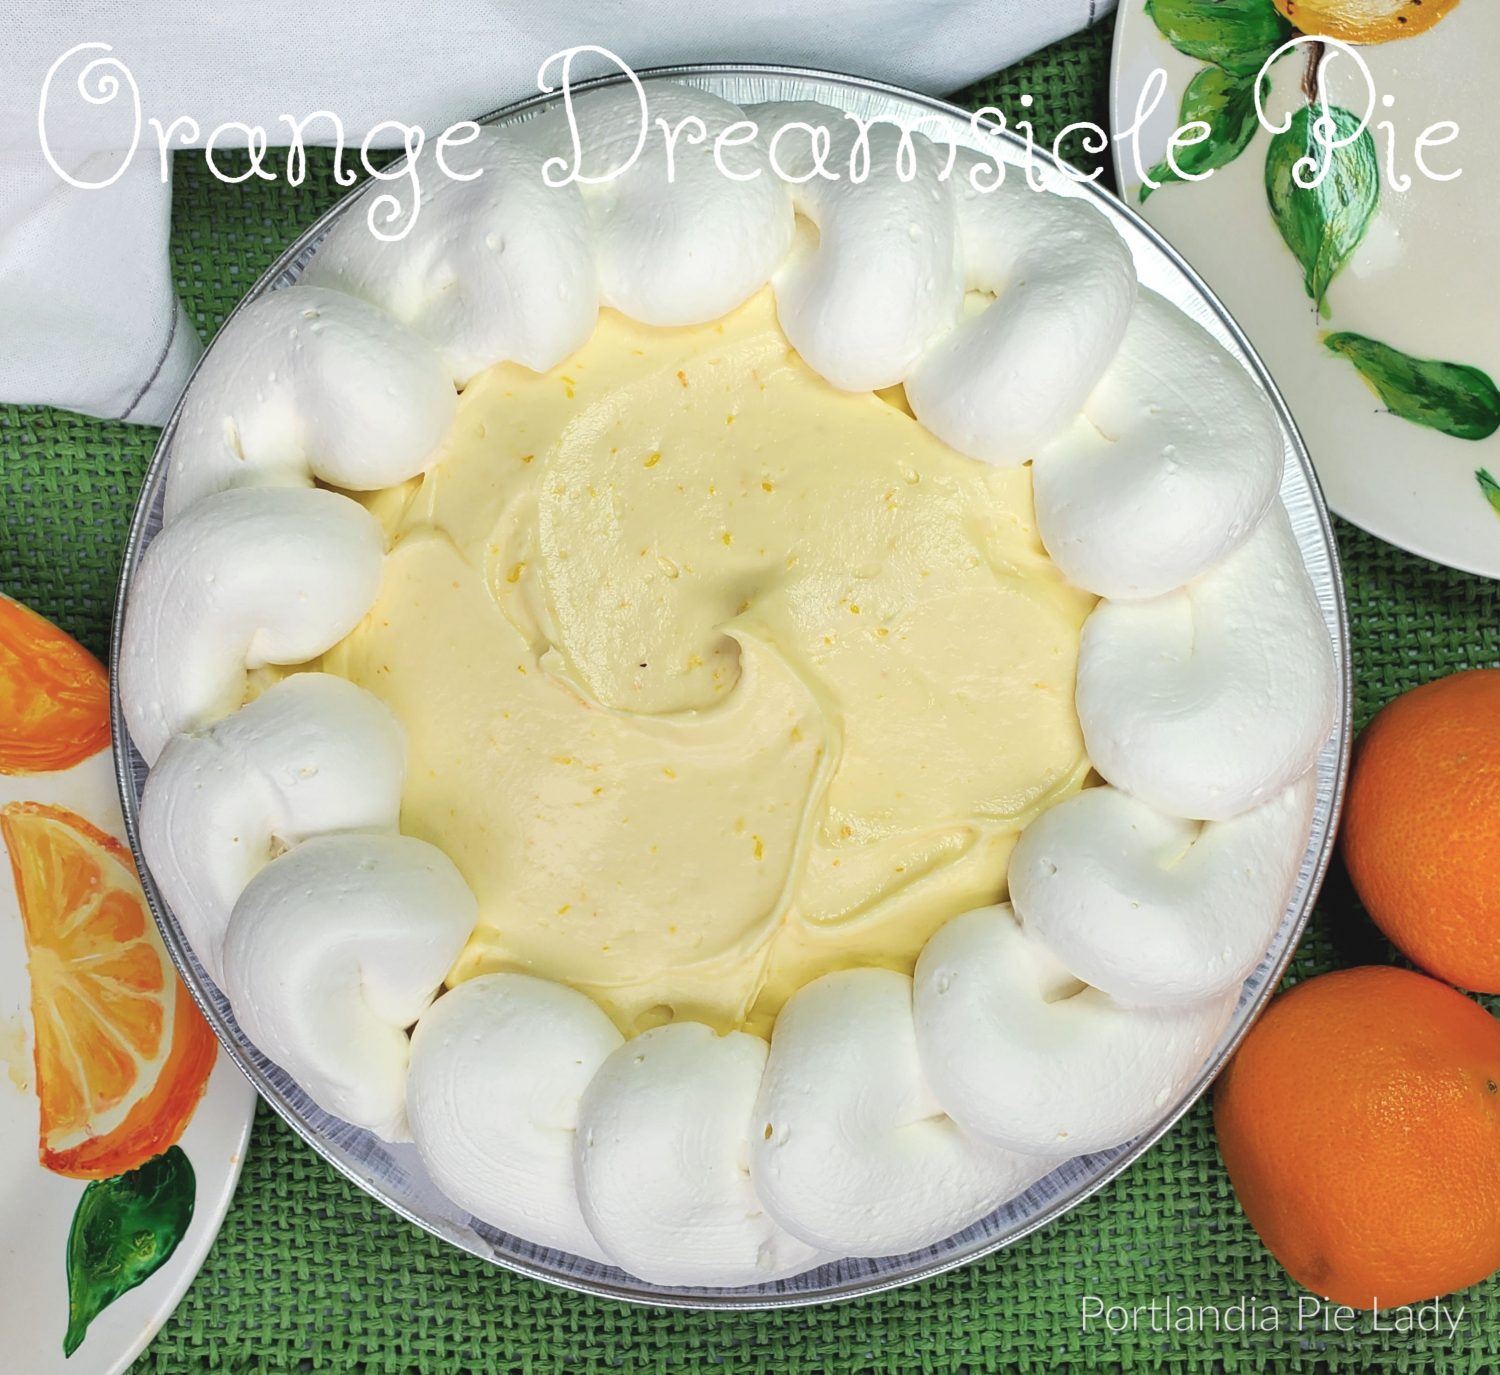 Orange Dreamsicle Pie perfectly captures the creamy vanilla ice cream center surrounded by the orange quiescently frozen treat we craved for every summer!